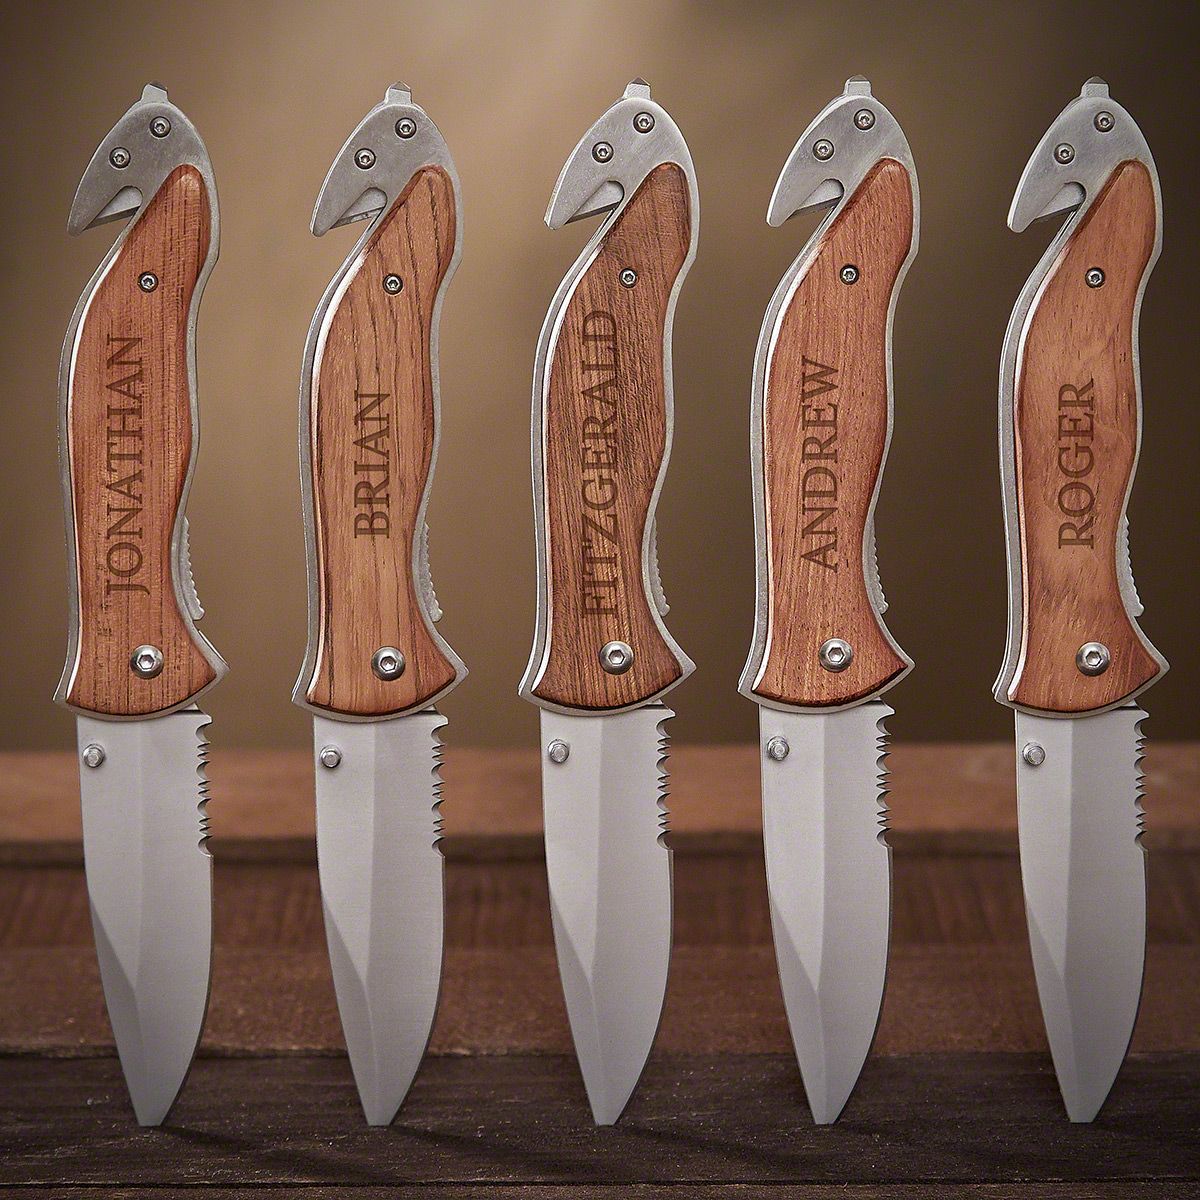 https://images.homewetbar.com/media/catalog/product/7/4/7401-personalized-liner-lock-knife-with-sleeve-set-of-5.jpg?store=default&image-type=image